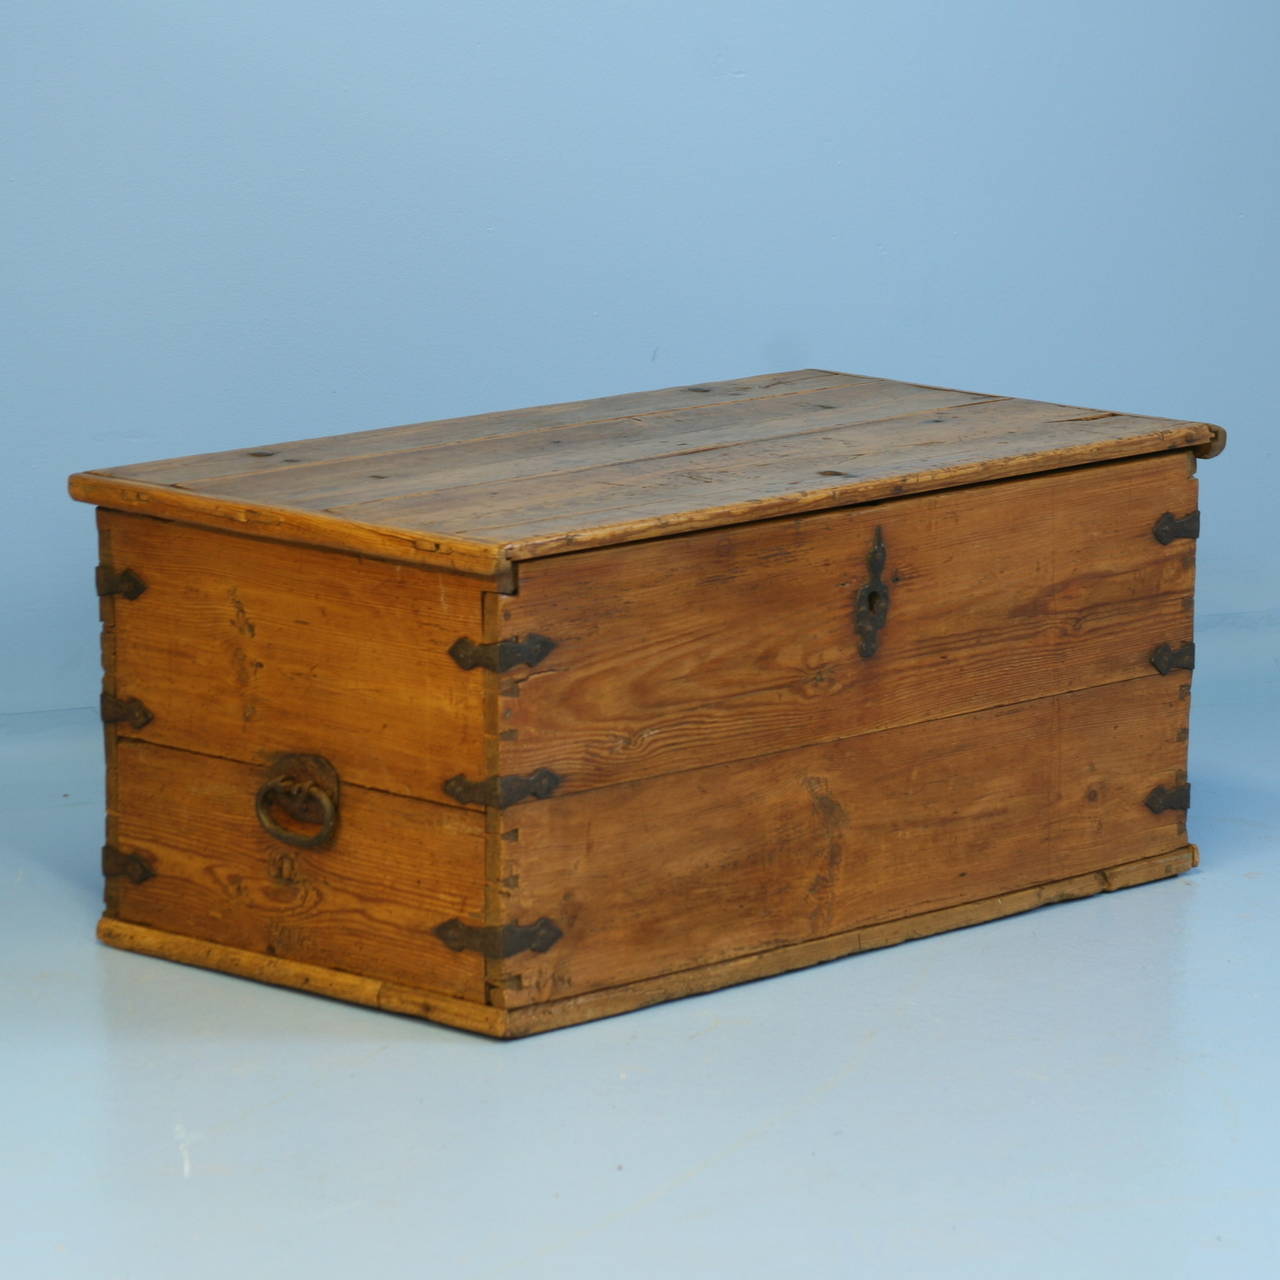 The warm patina of this pine trunk reflects the 200 years of use it has received. The hand wrought iron side handles and corners add great visual contrast against the wood.  Notice the exceptionally long hinges on the inside top. The entire trunk